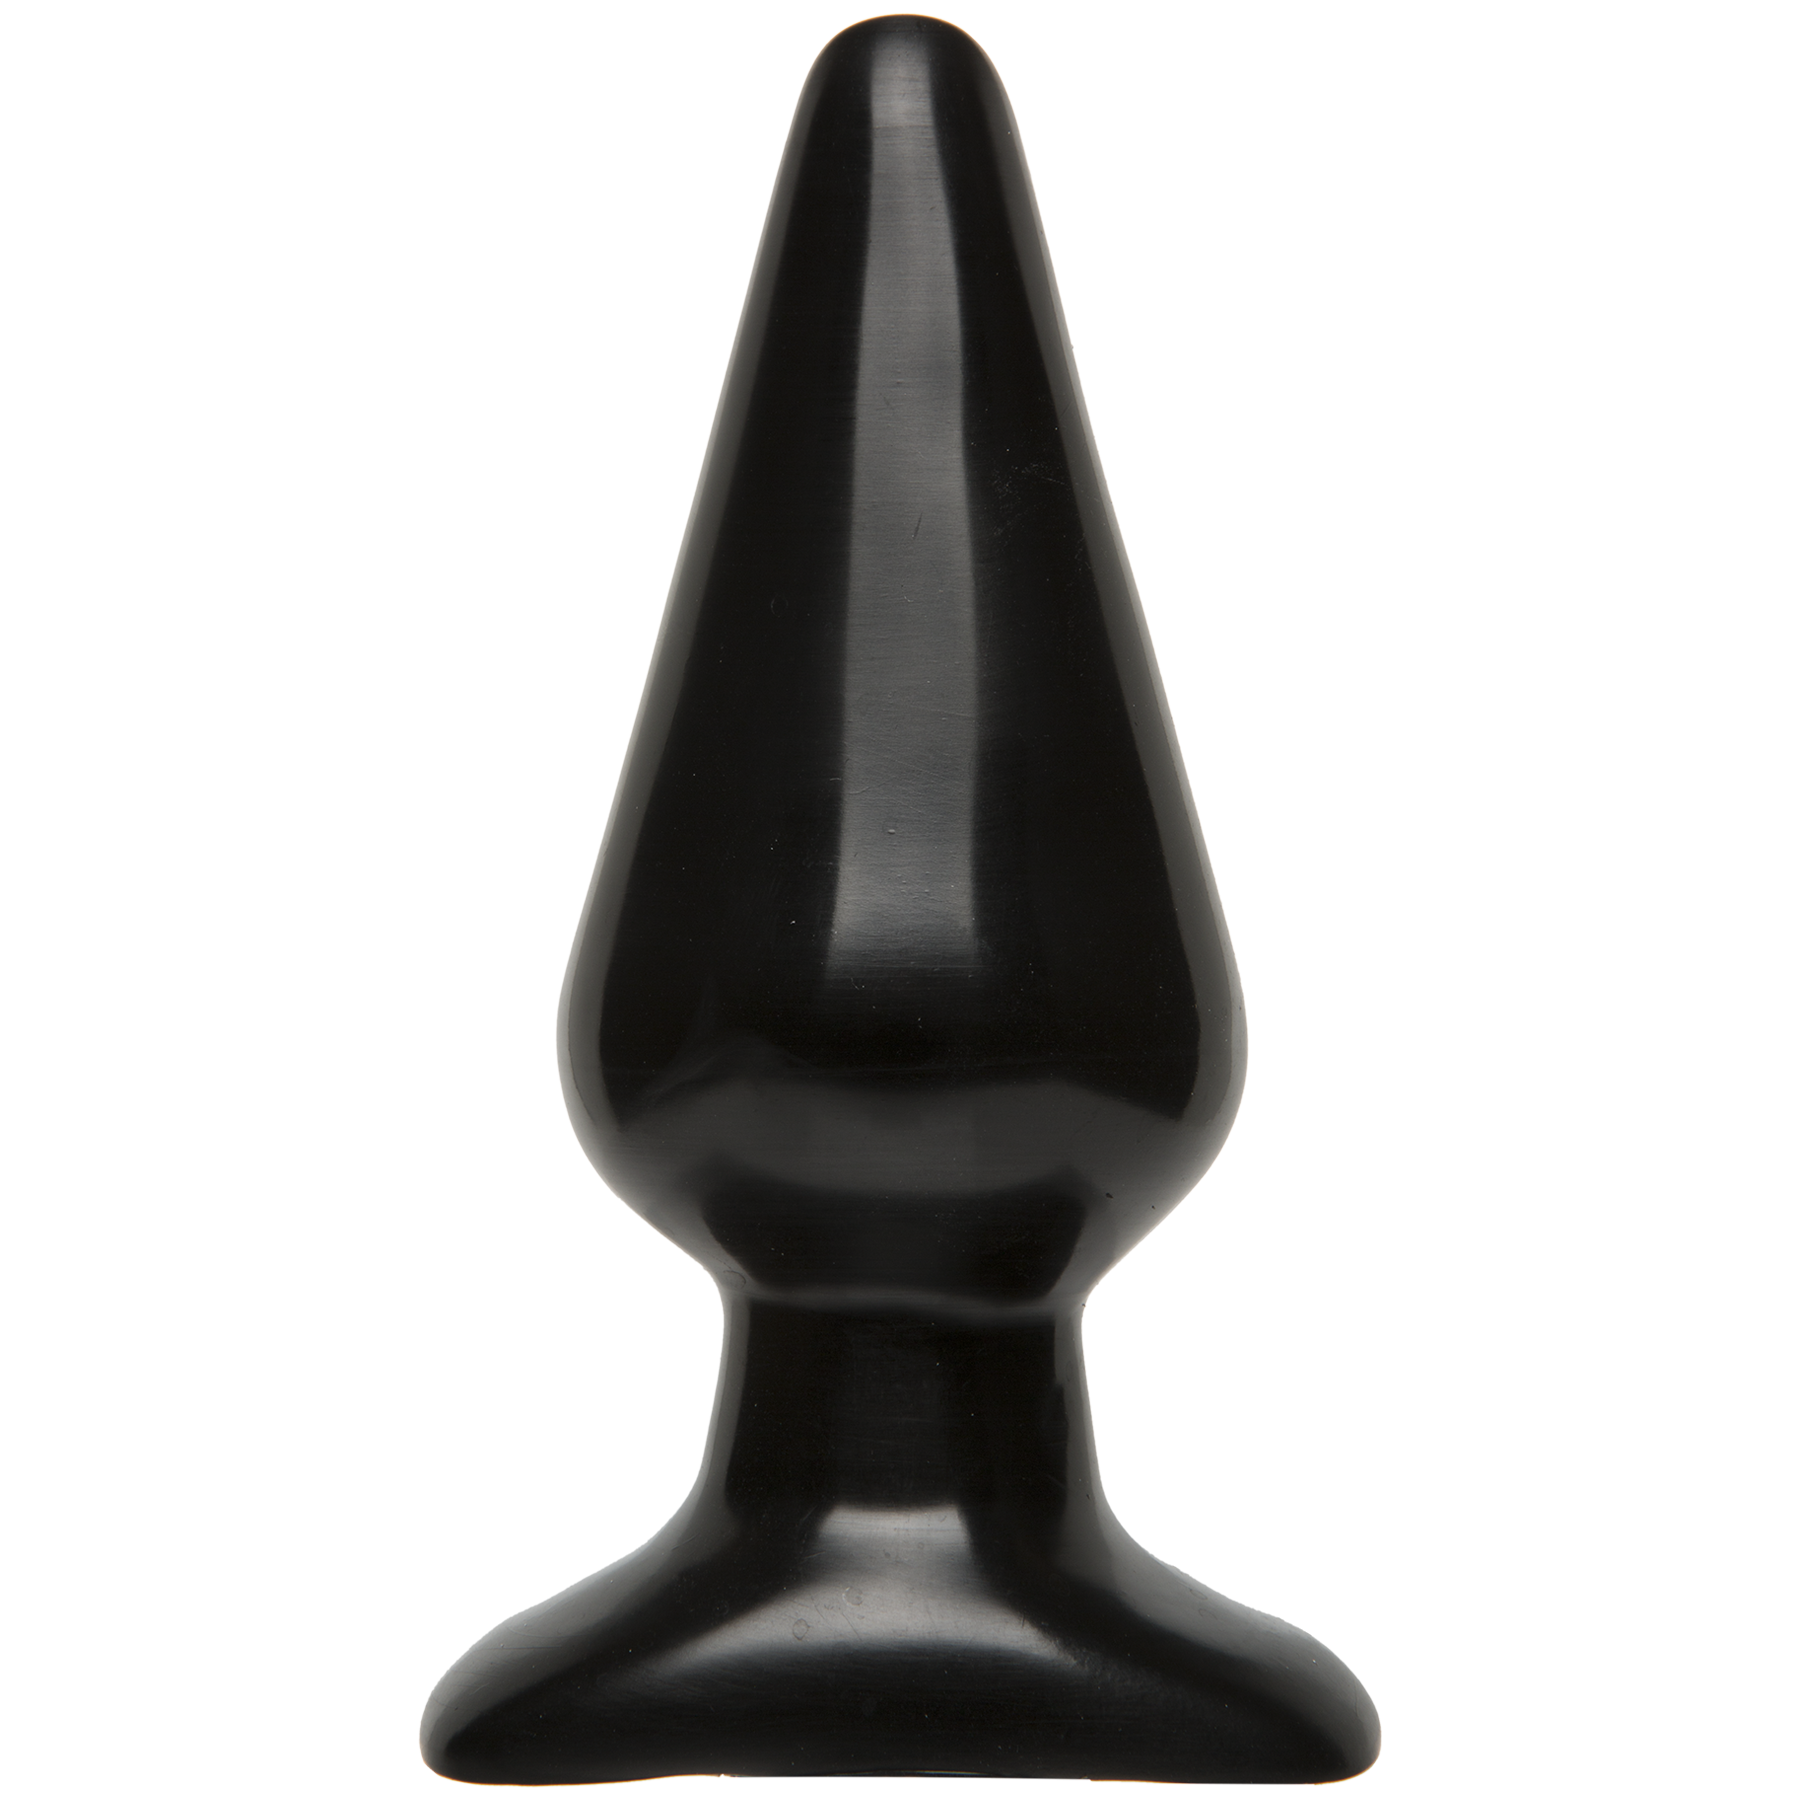 Classic Smooth Butt Plugs - Large, Black - Thorn & Feather